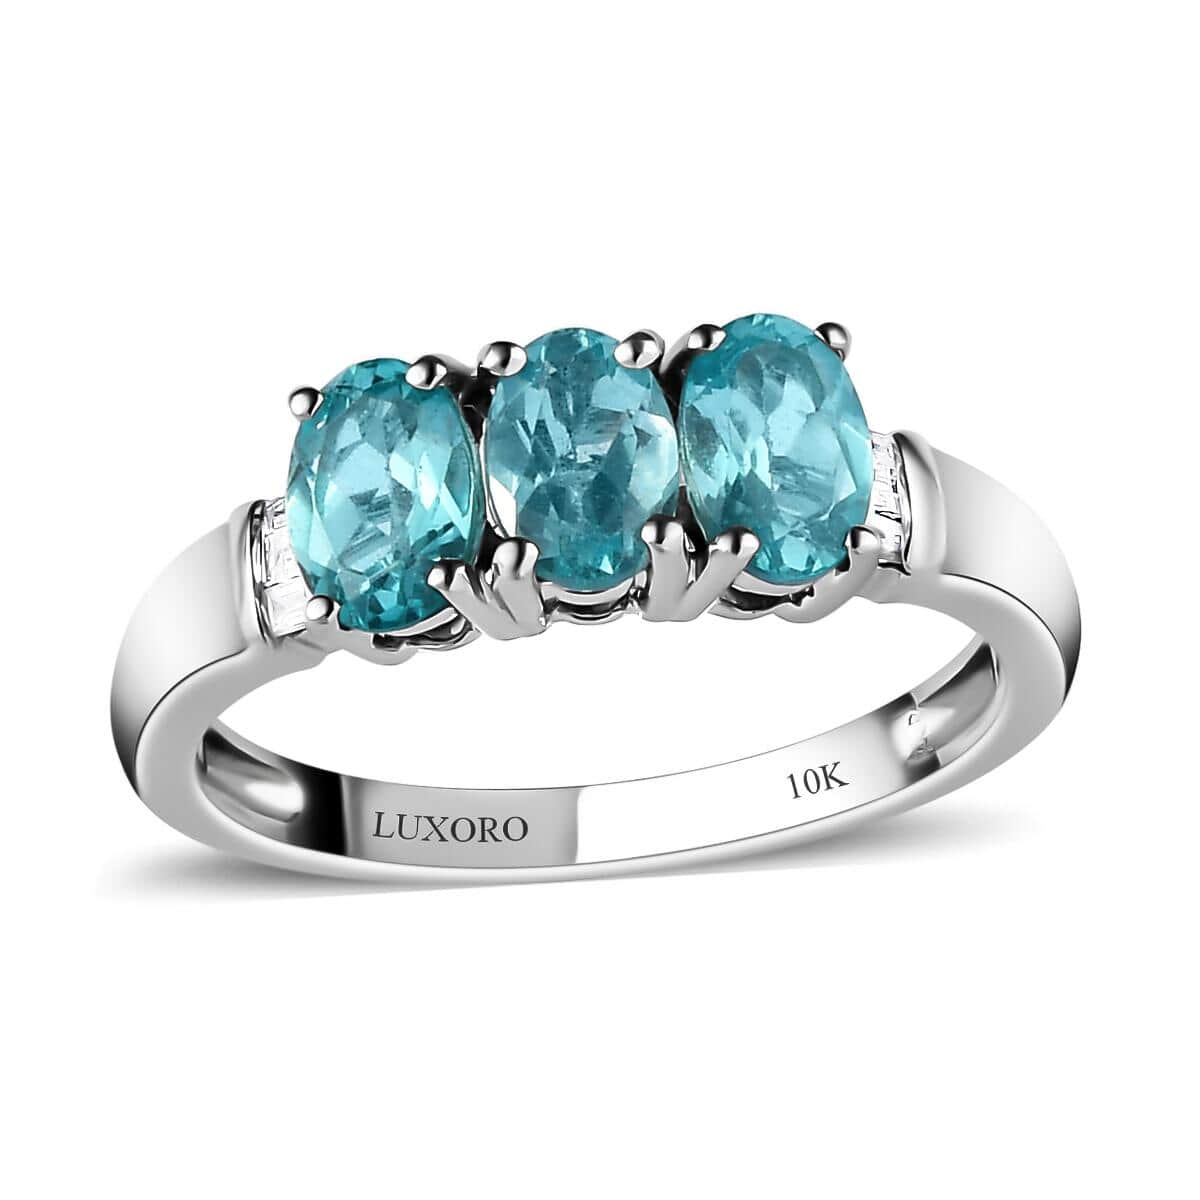 LUXORO 10K White Gold Premium Madagascar Paraiba Apatite, Diamond Trilogy Ring (Size 10.0) (2.50 g) (Delivery in 12-15 Business Days) 1.50 ctw image number 0